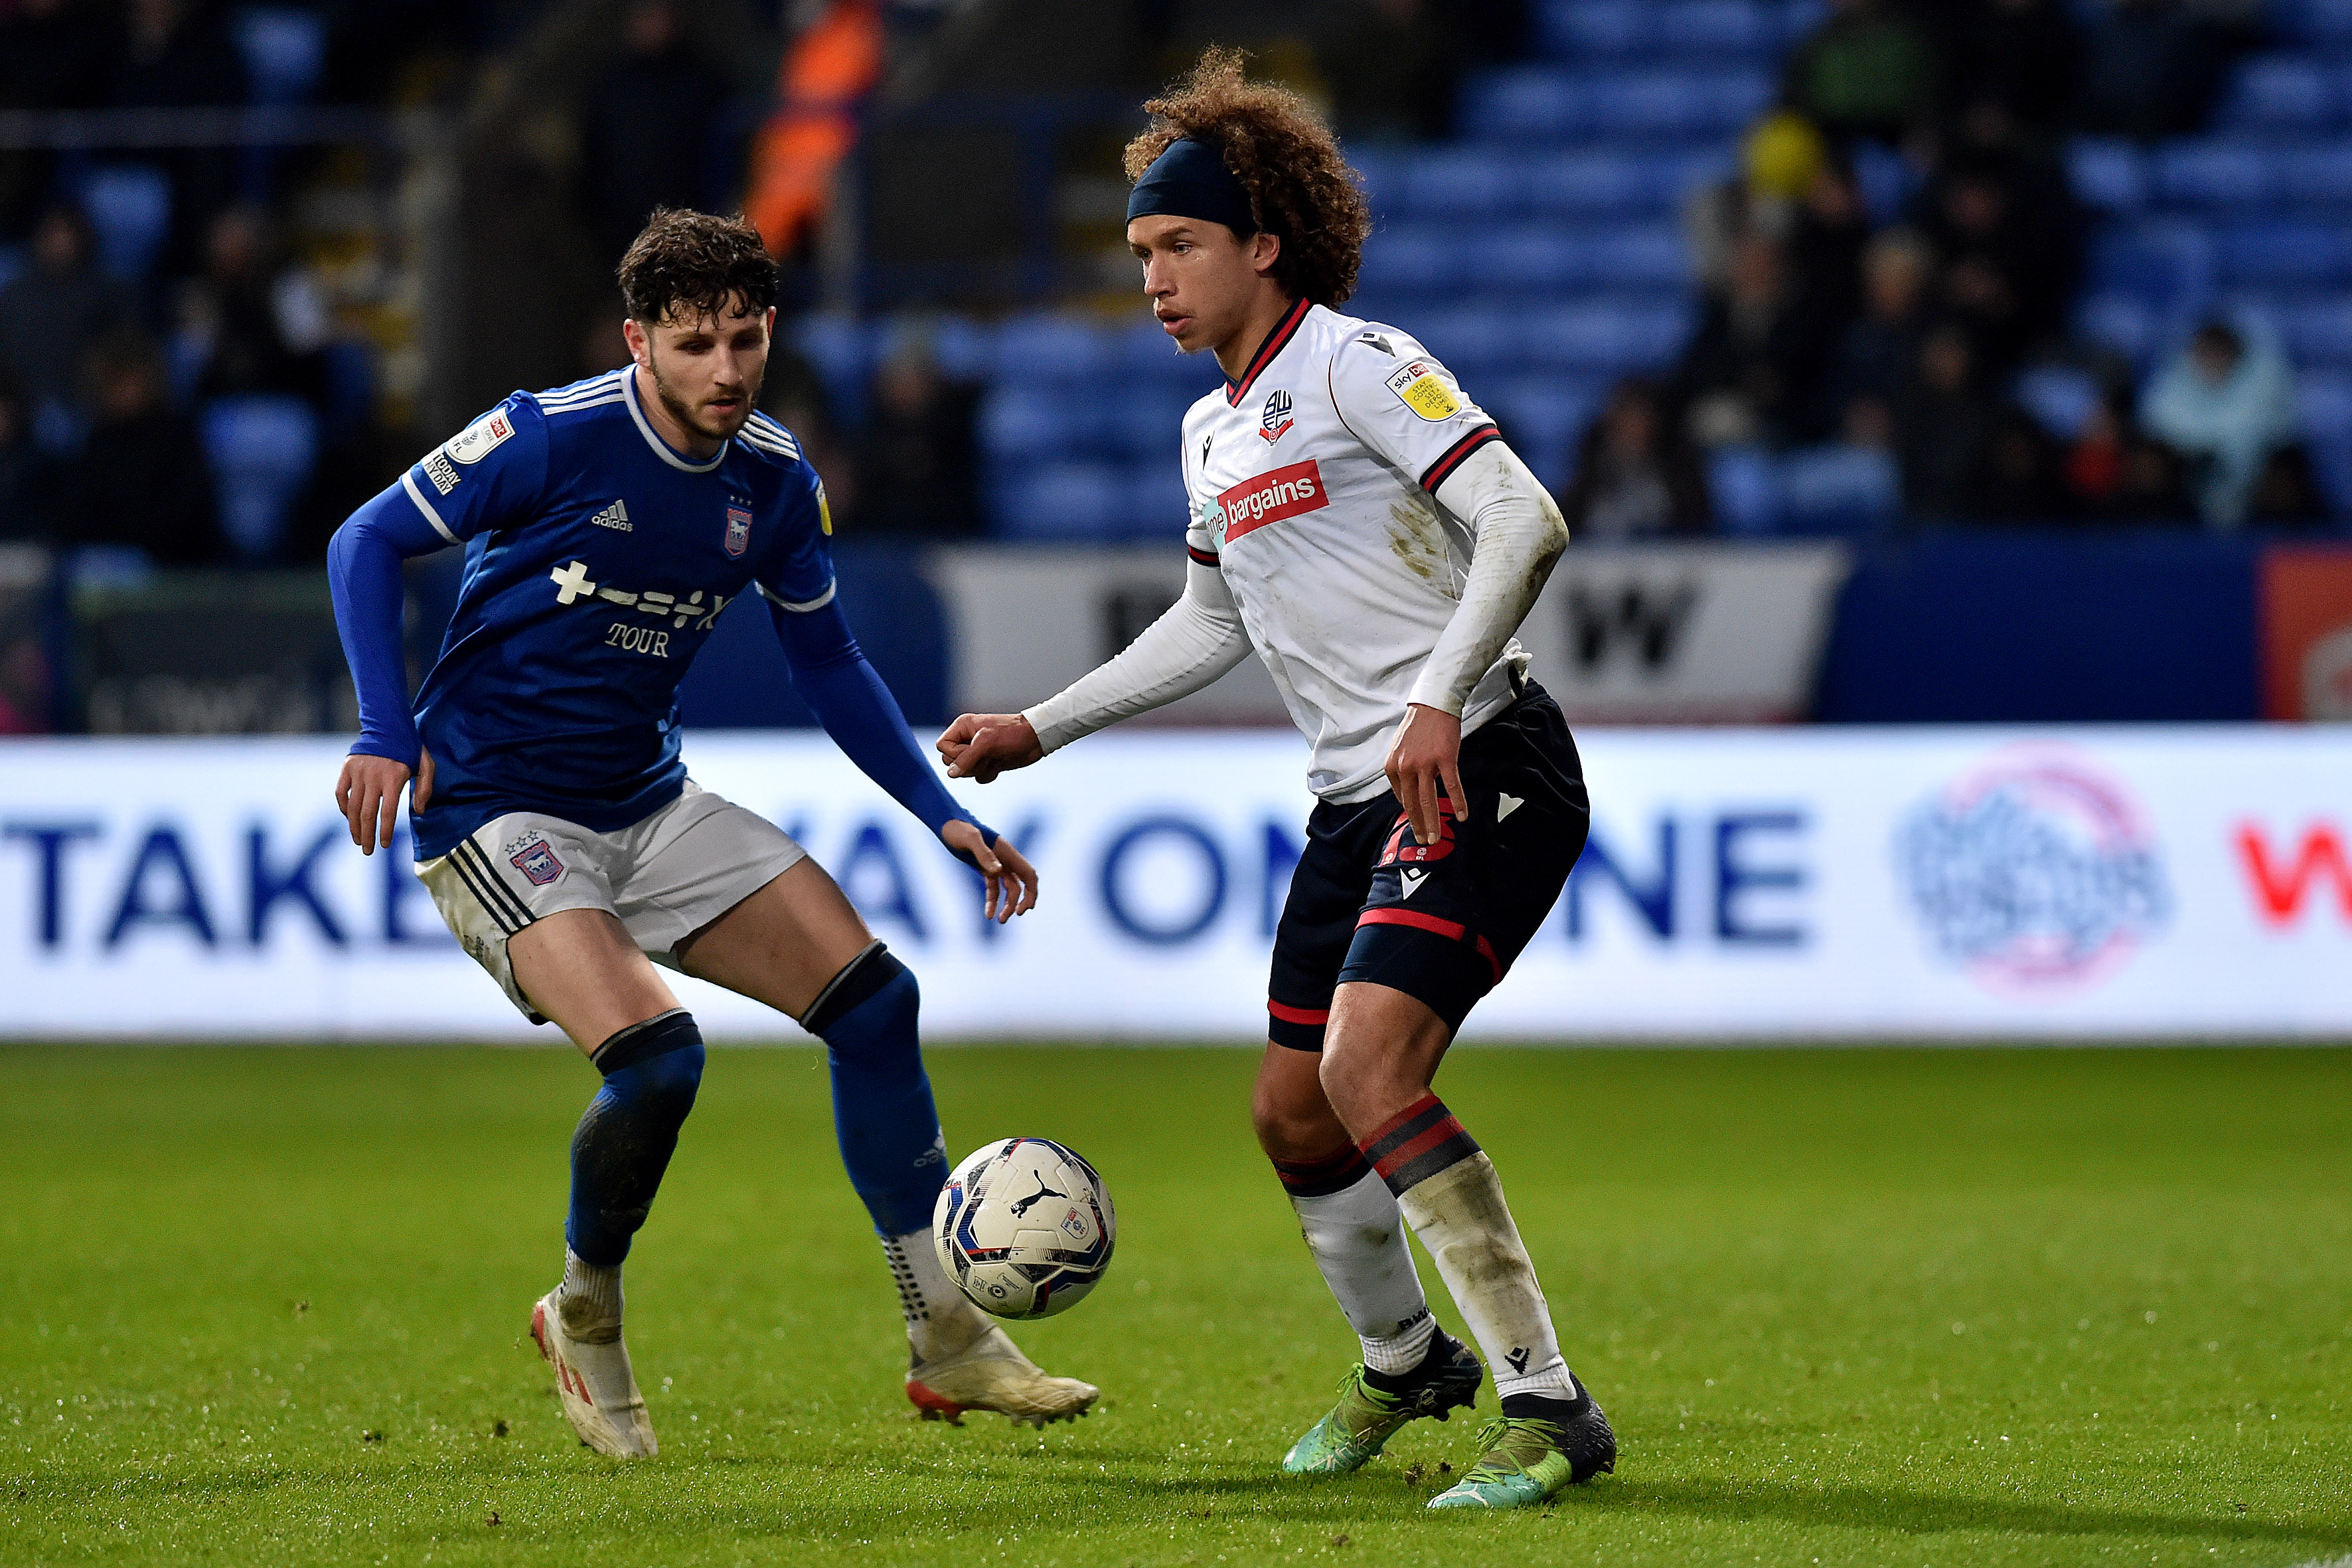 Bolton Wanderers v Ipswich Town - Sky Bet League One